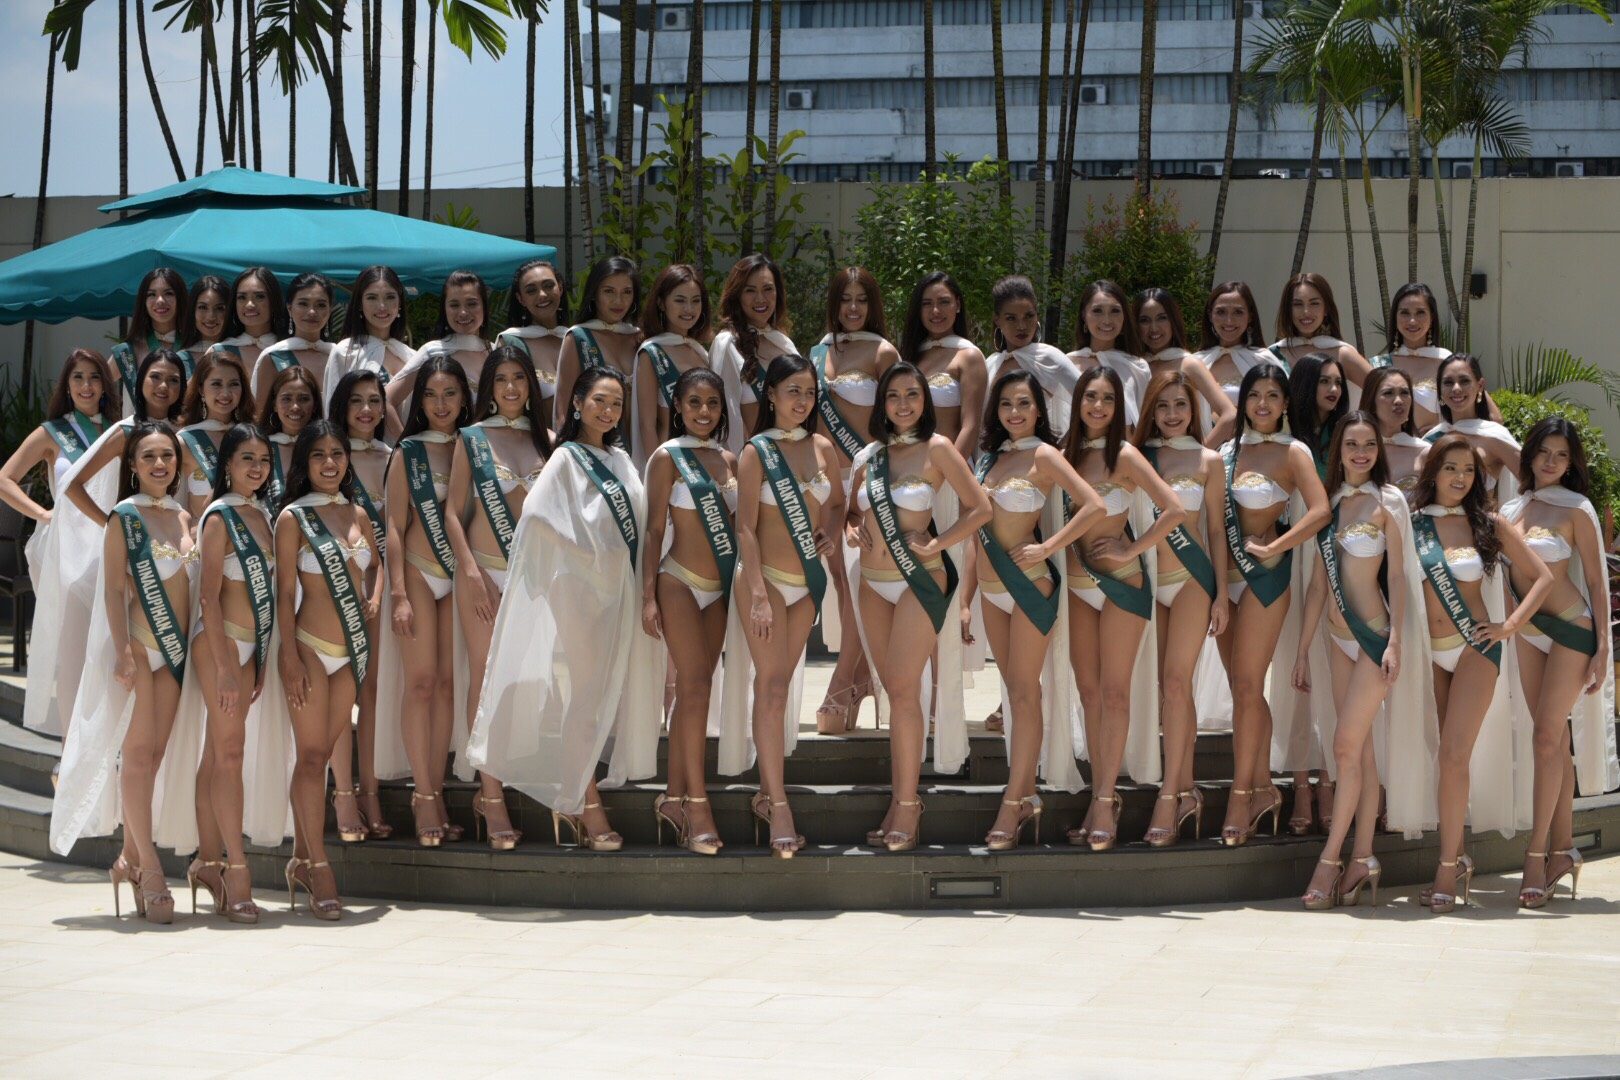 IN PHOTOS: The candidates of Miss Earth Philippines 2018